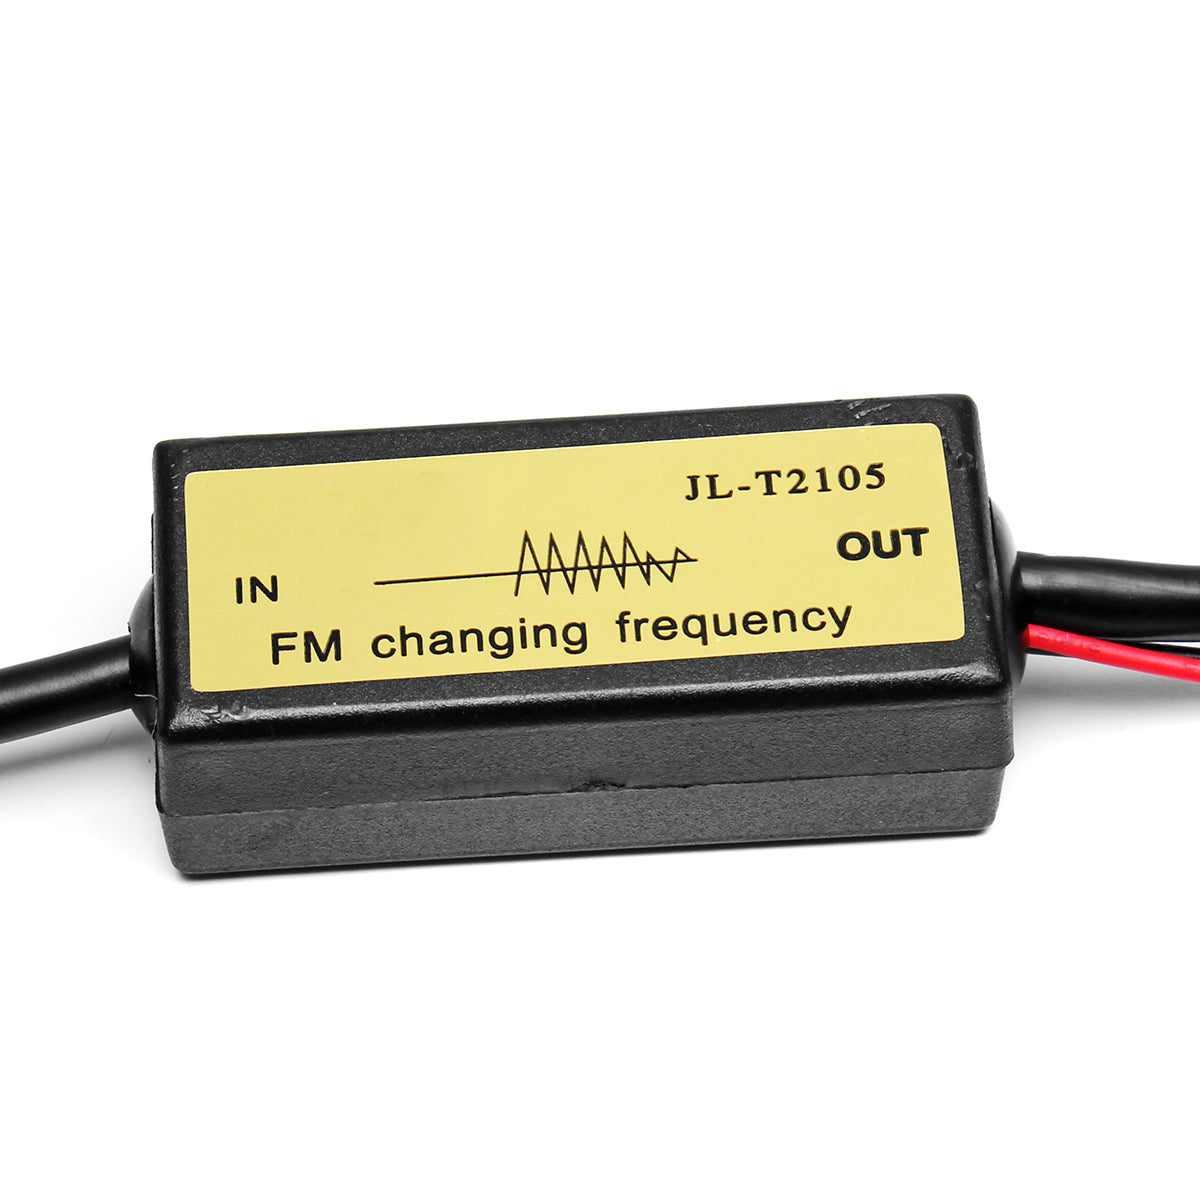 JL-T2105 Car Radio CD Player FM Band Frequency Antenna Expander Converter Down-frequency For SONY/KENWO/ALPINE - Auto GoShop